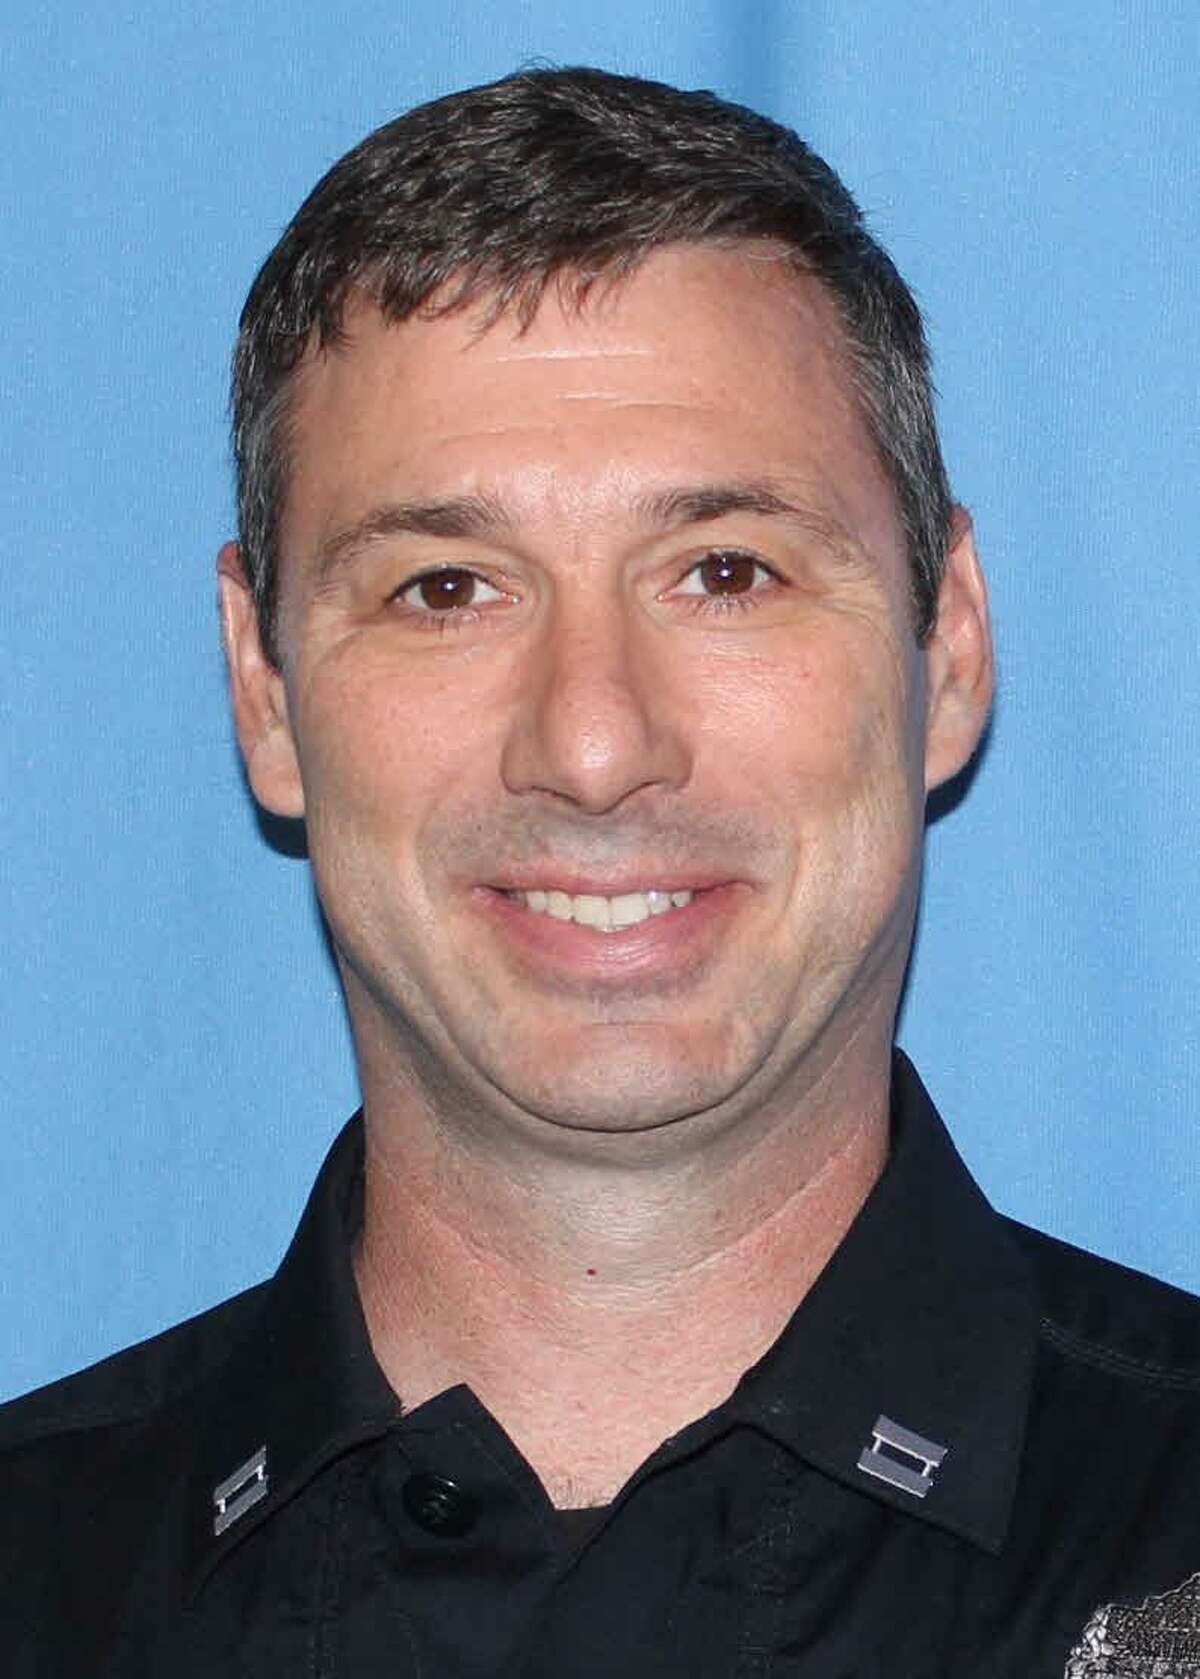 Former San Antonio Police Department Capt. Shawn Ury was fired in March 2017 for insubordination after he refused to quit his off-duty job at USAA. He had been with the department for 23 years.